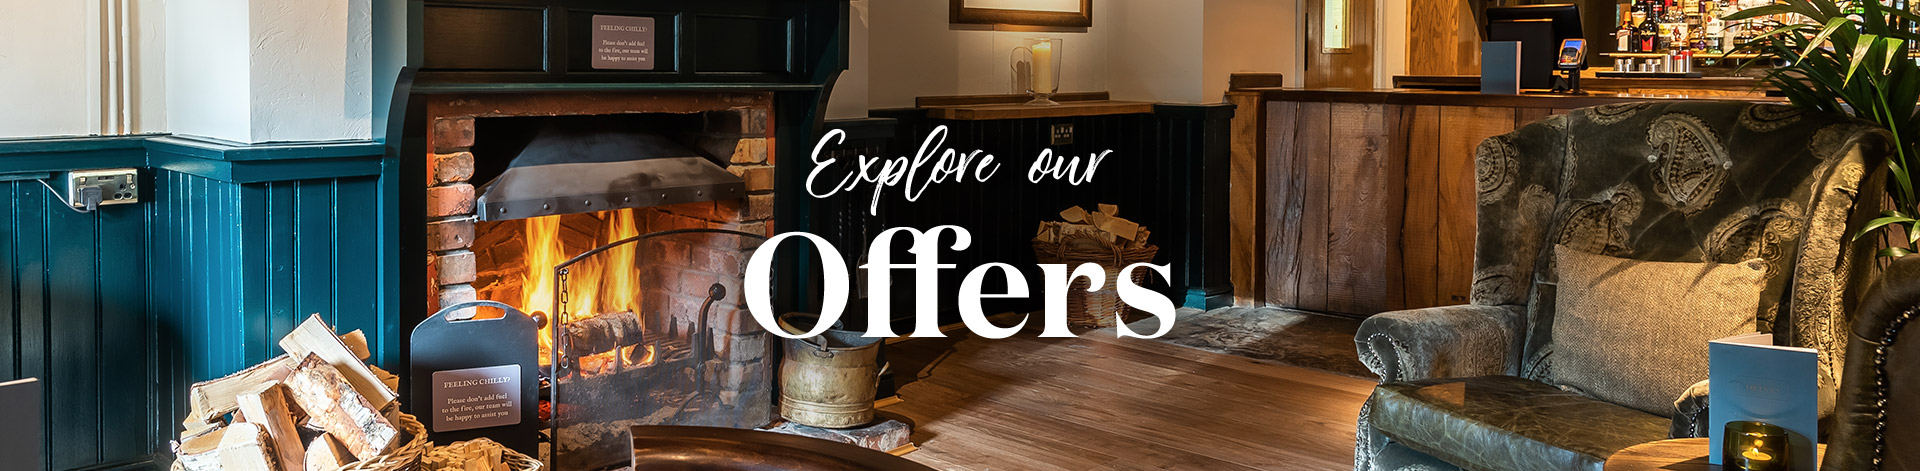 Our latest offers at The Bear's Head